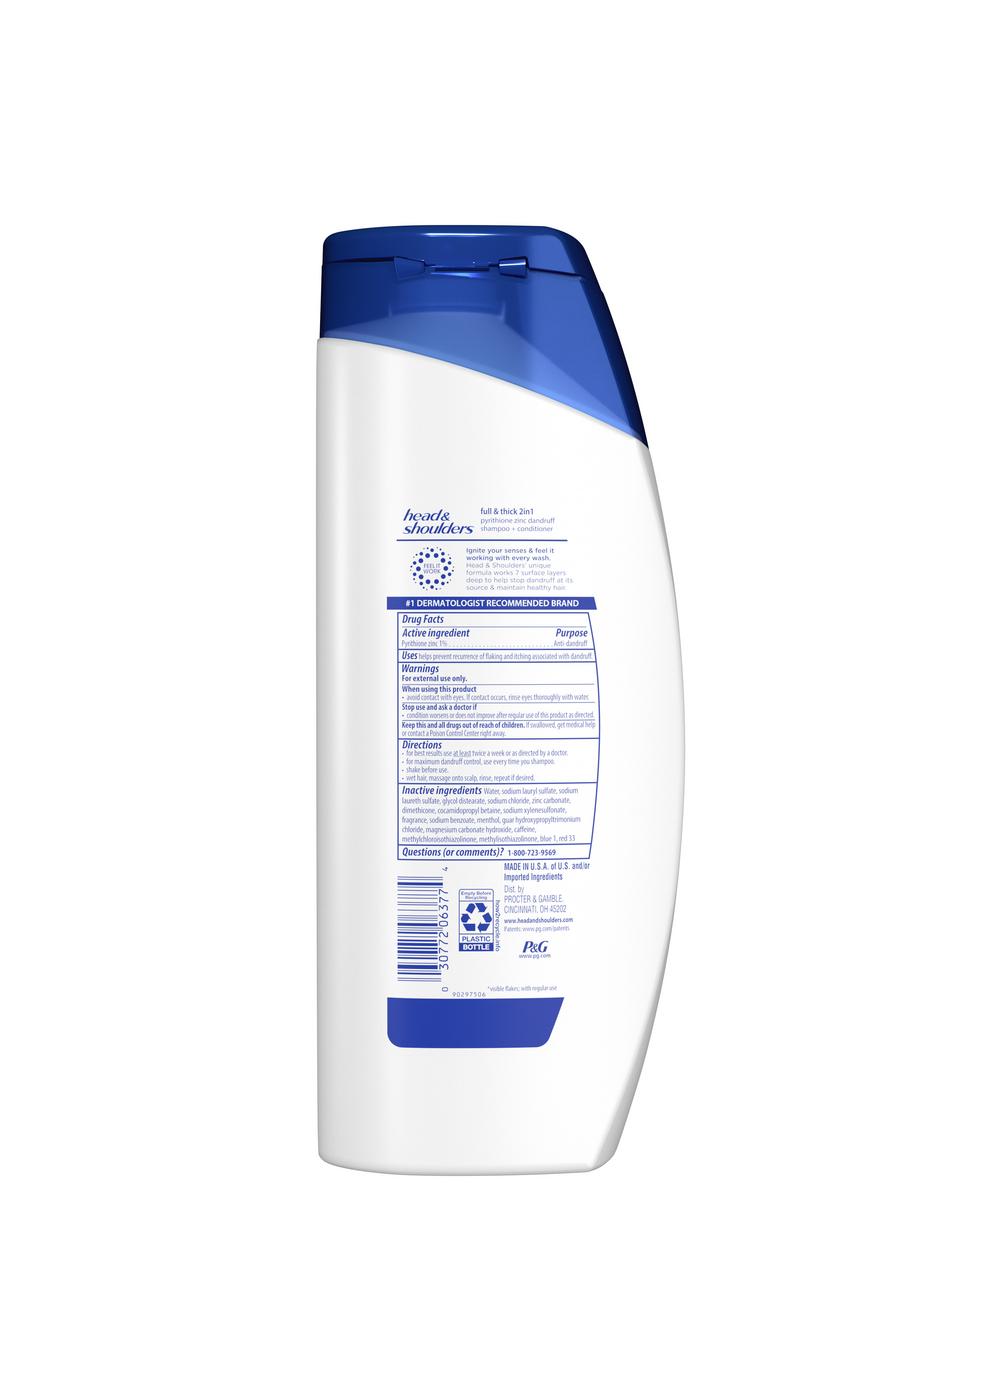 Head & Shoulders 2 in 1 Men Dandruff Shampoo and Conditioner - Full & Thick; image 2 of 11